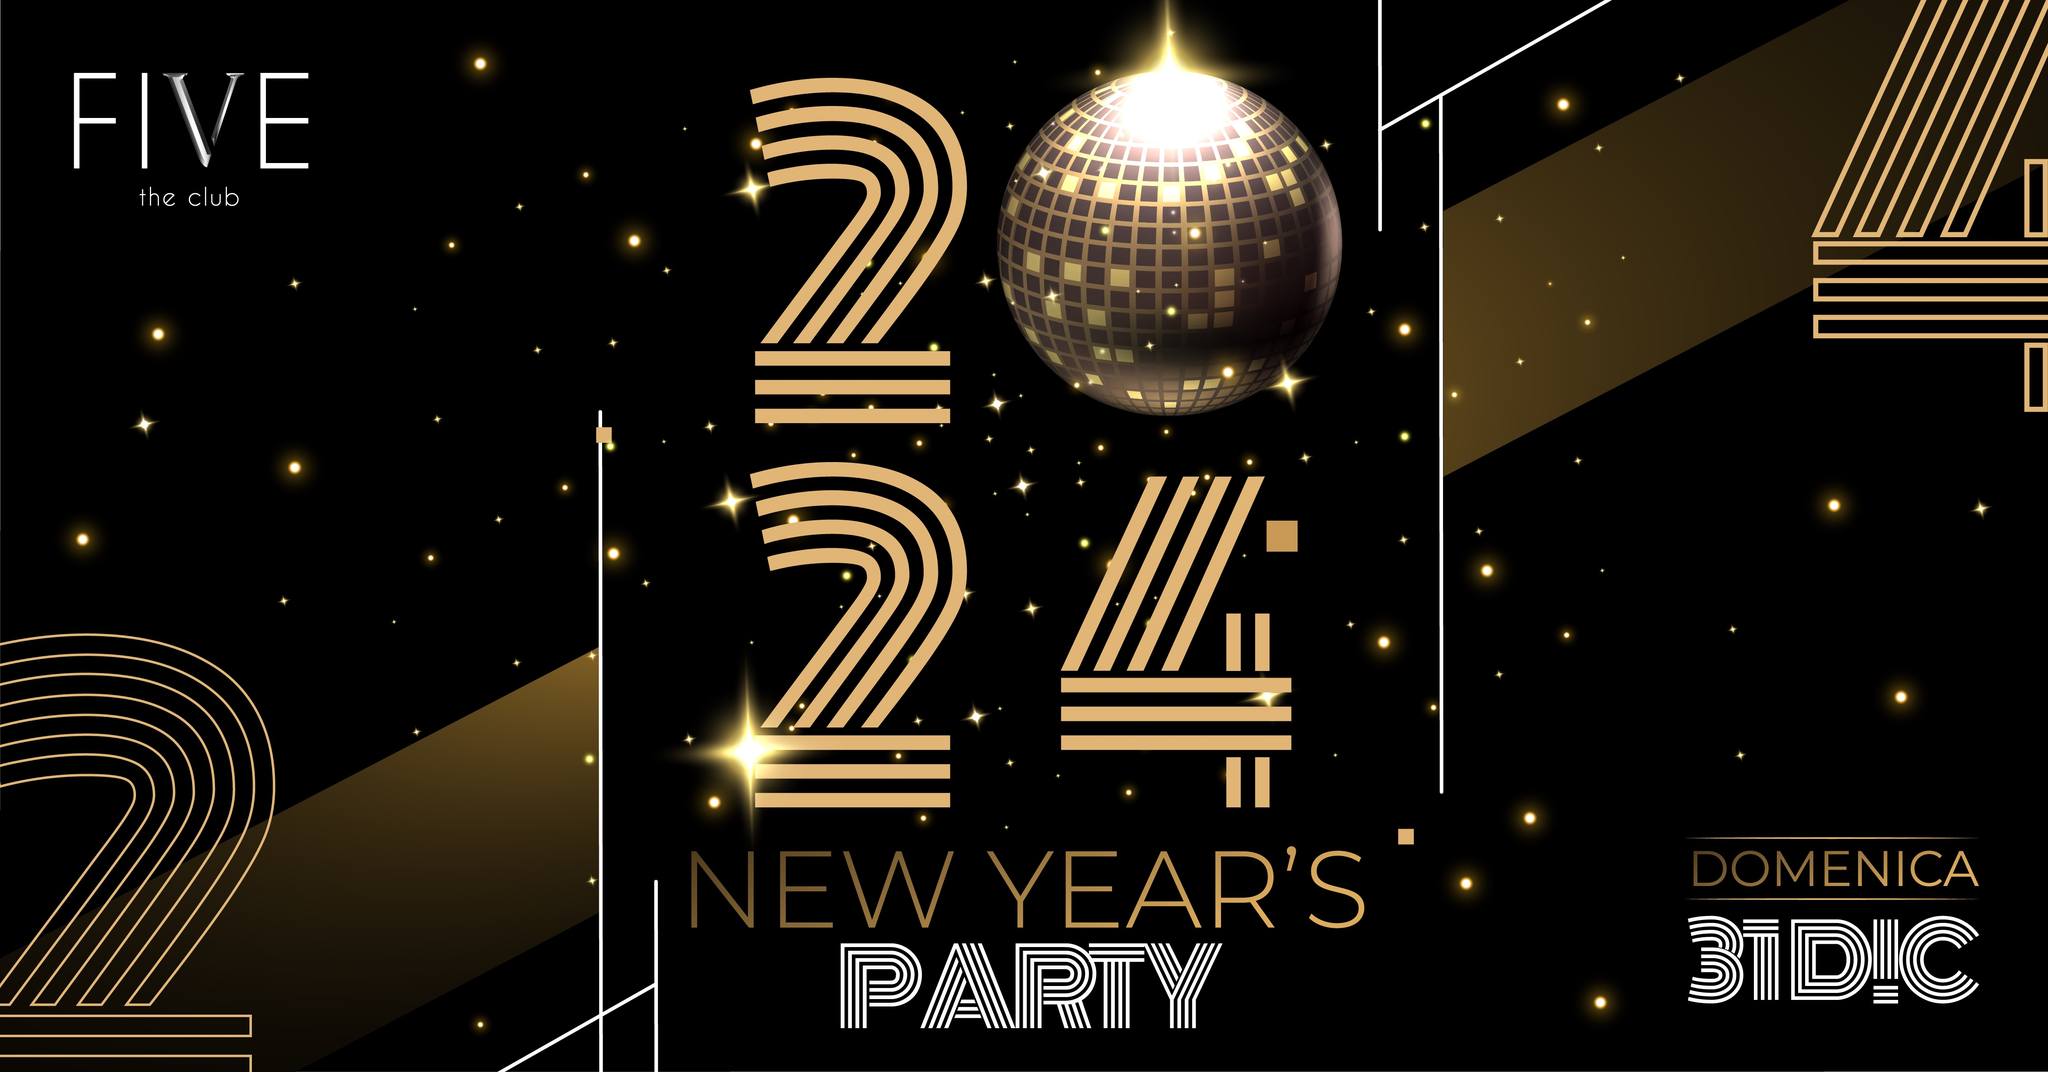 FIVE -UDINE- NEW YEARS PARTY - EventiFVG.it